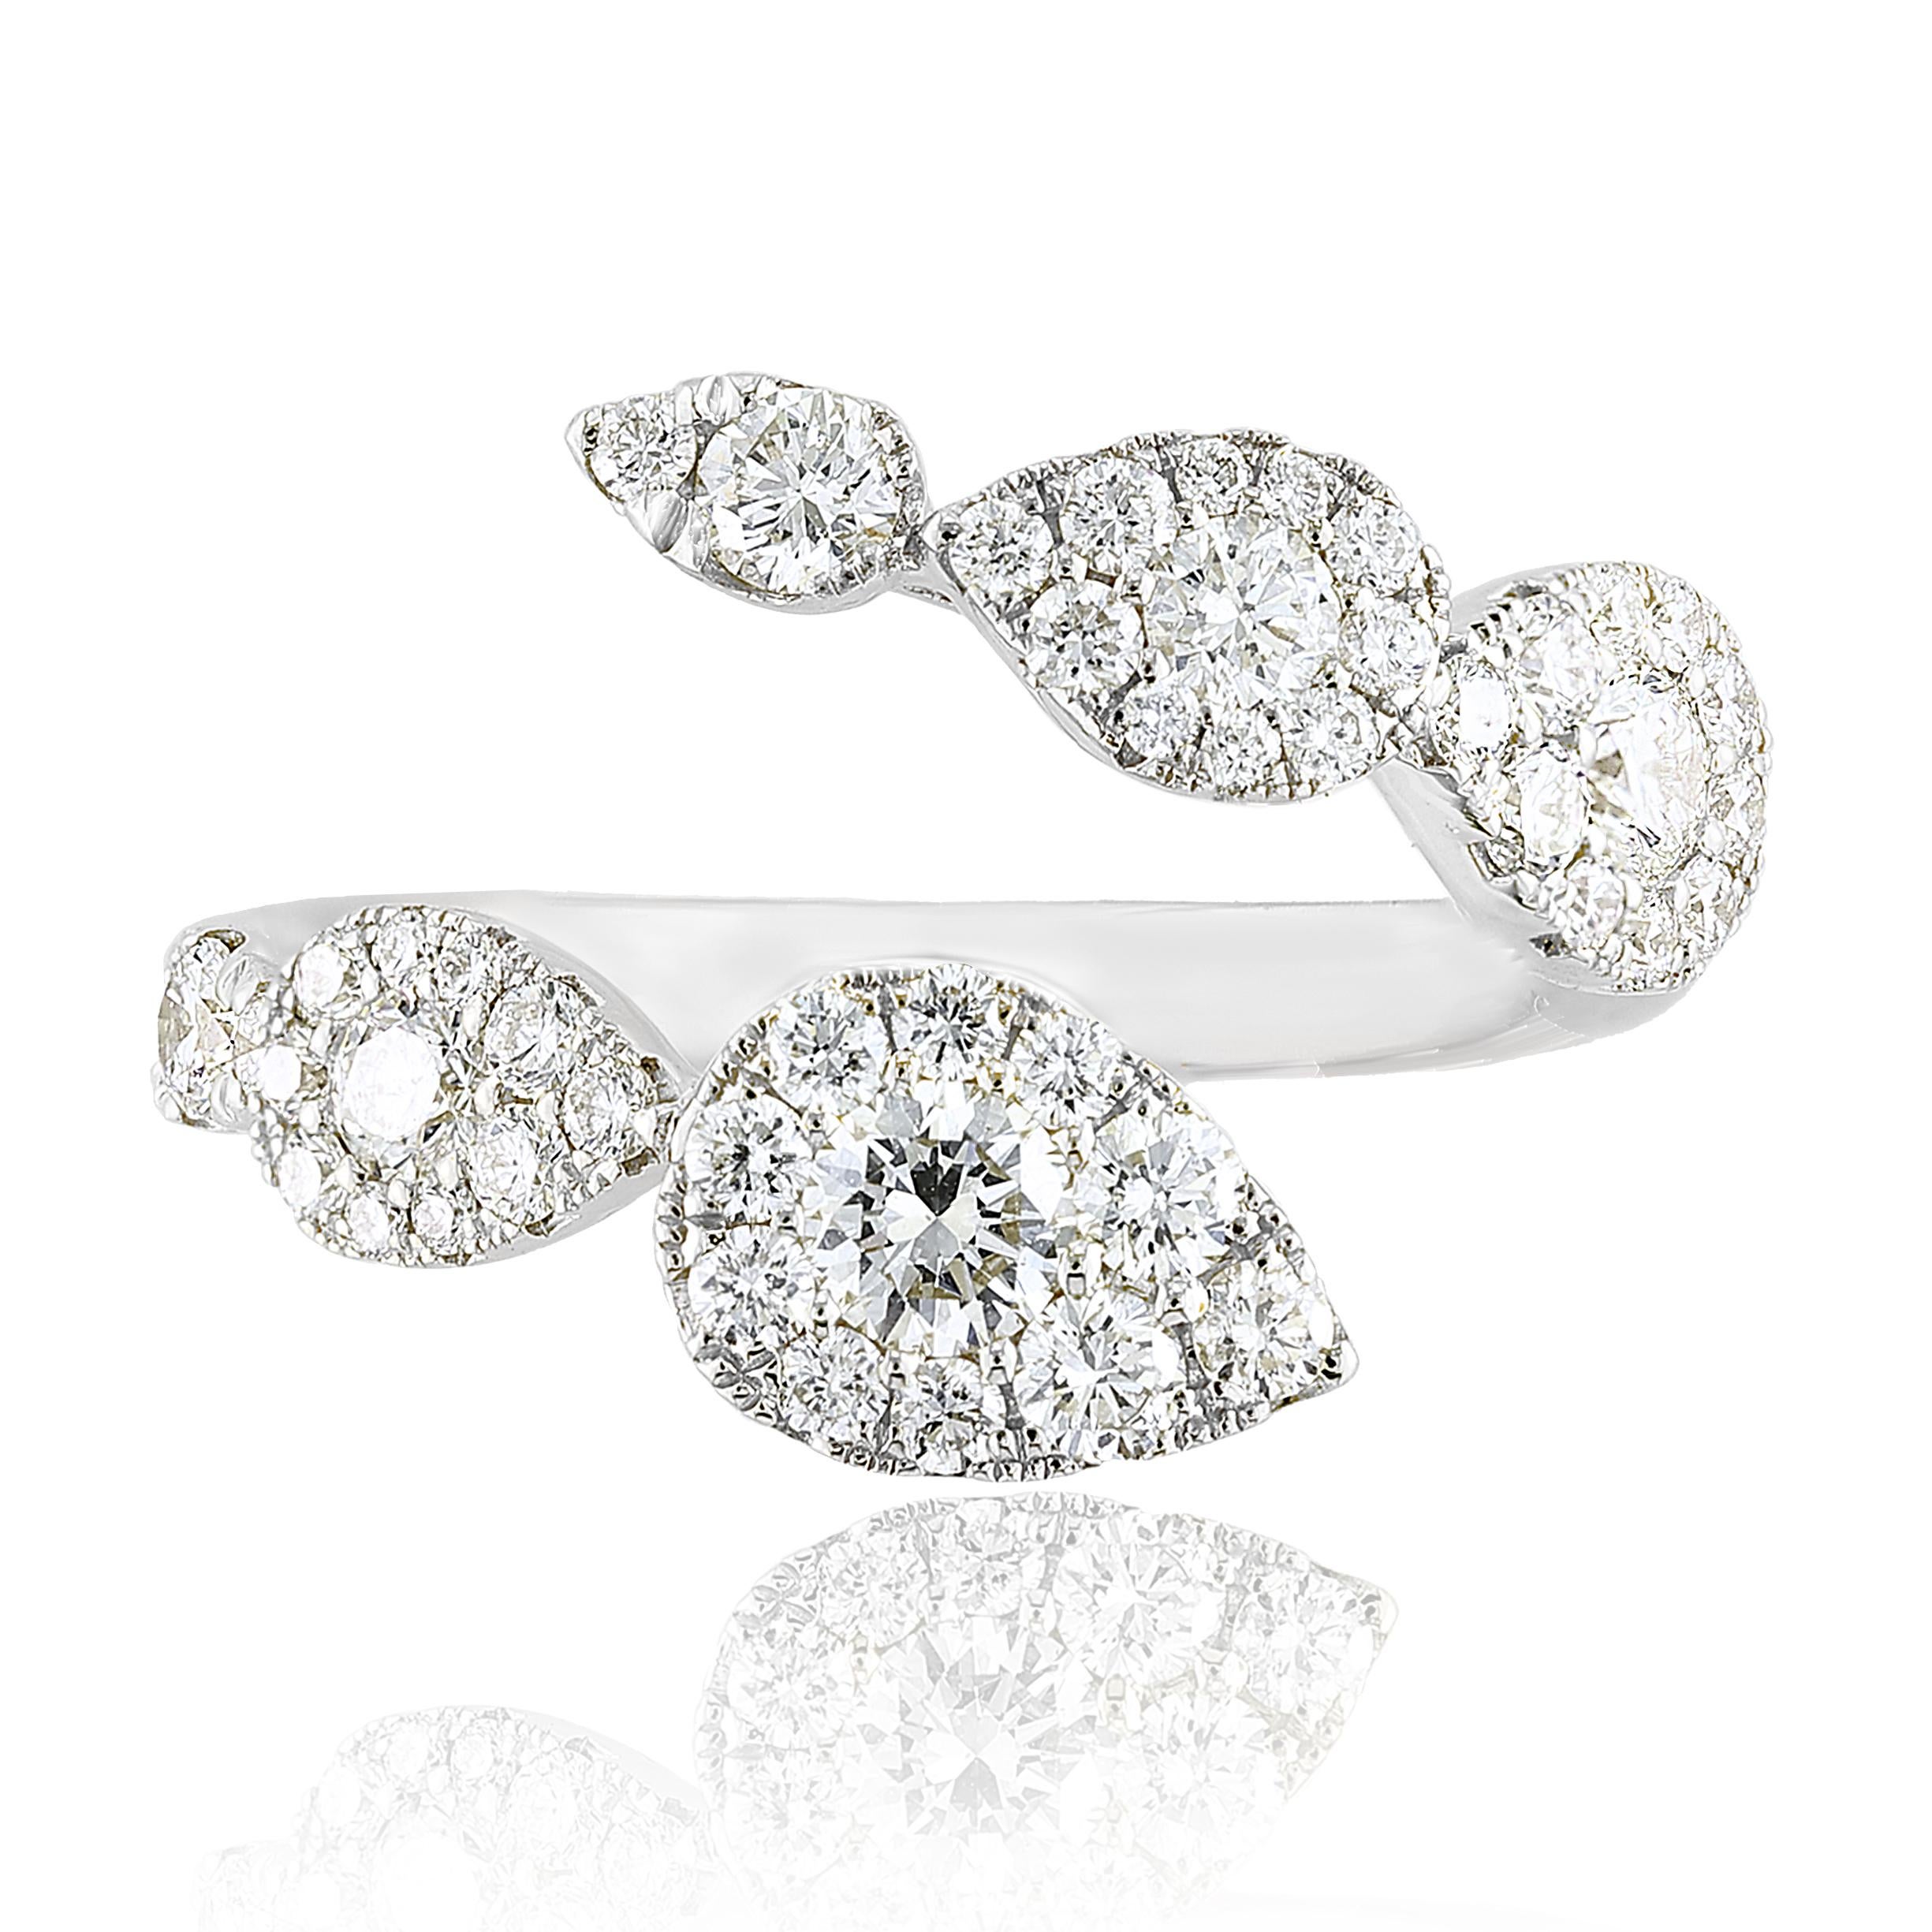 The stunning forever-together Toi et Moi ring features Brilliant cut Diamonds embraced by east to west halfway to the shank. Handcrafted in 18k White Gold.
48 Brilliant Cut Diamonds weigh 1.16 carats on both sides.
A classic Ring full of luster and